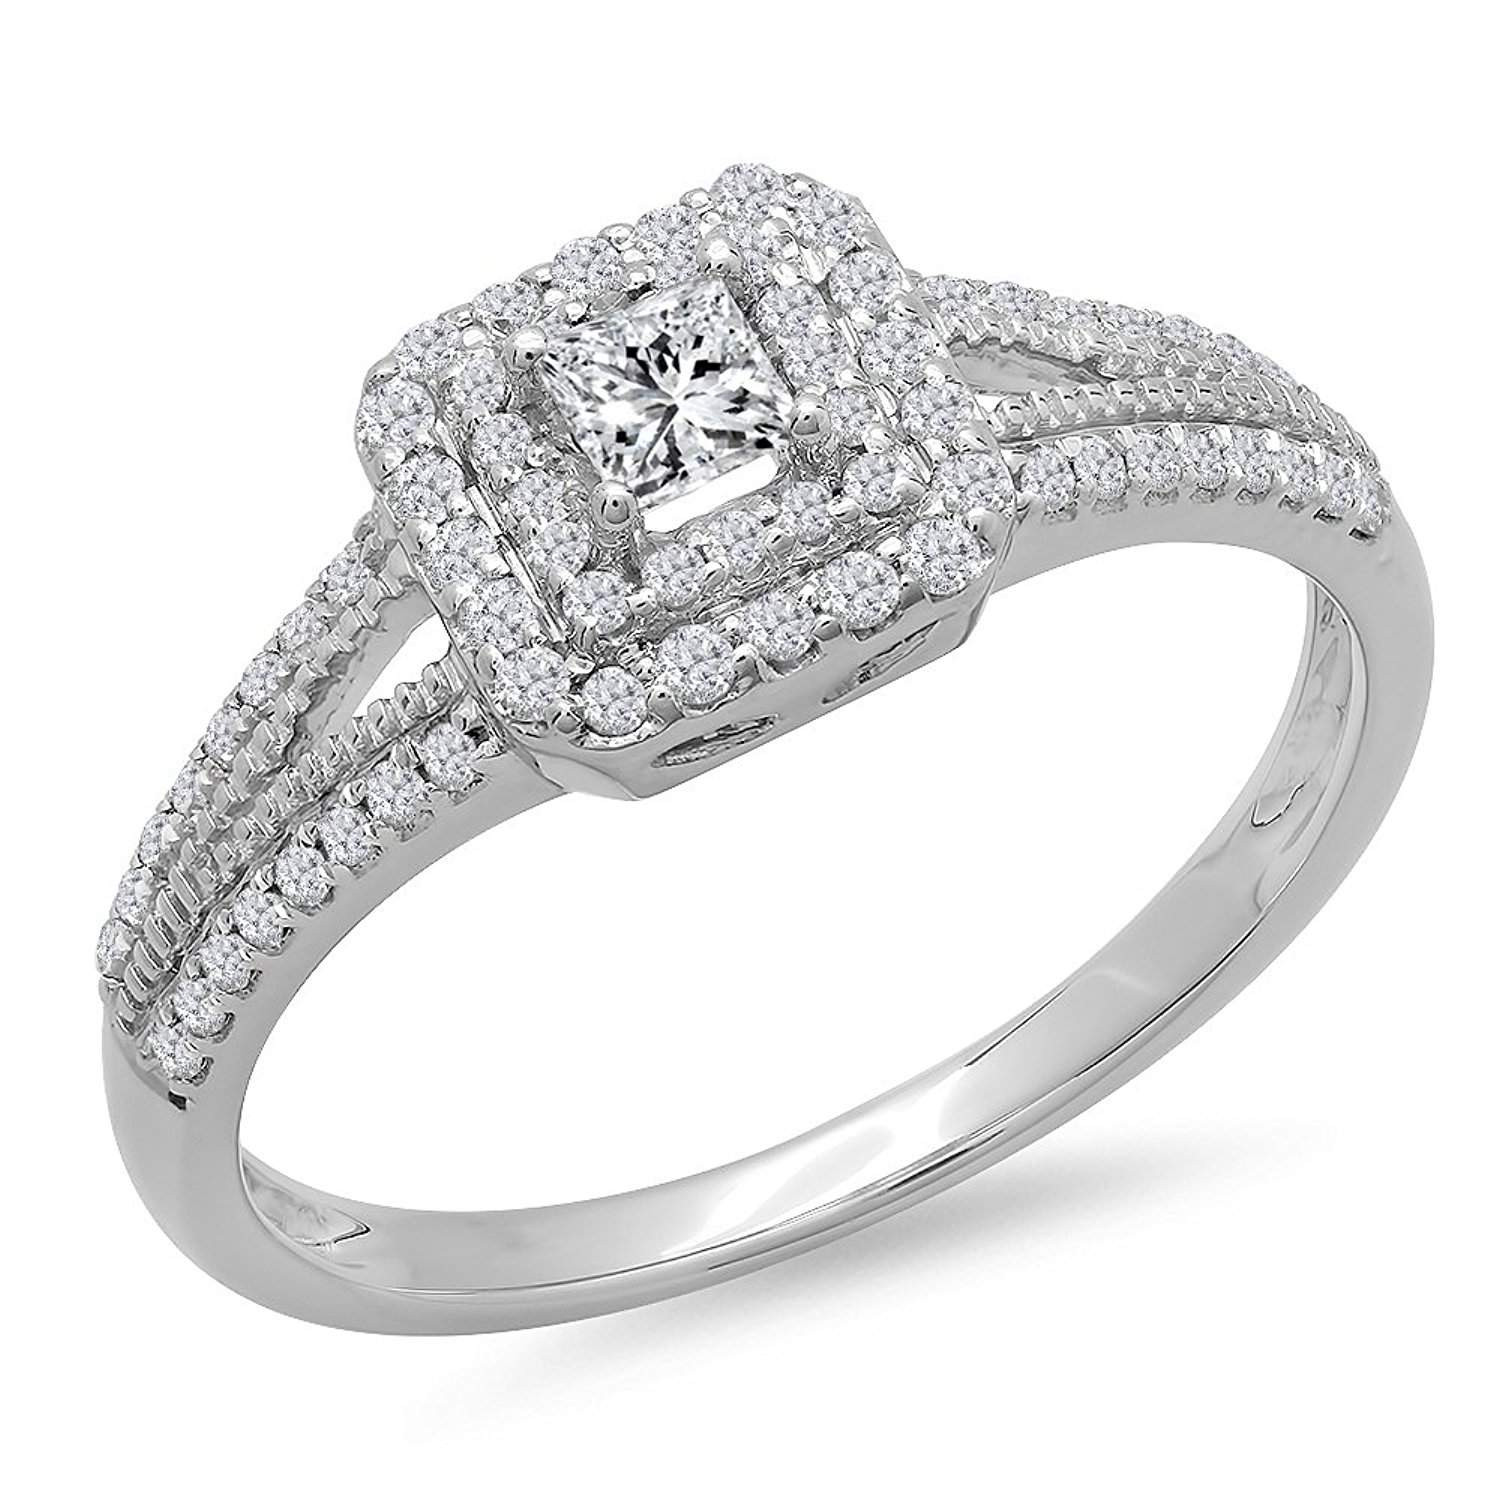 Cheap Diamond Wedding Rings
 Top 10 Best Valentine’s Day Deals on Engagement Rings